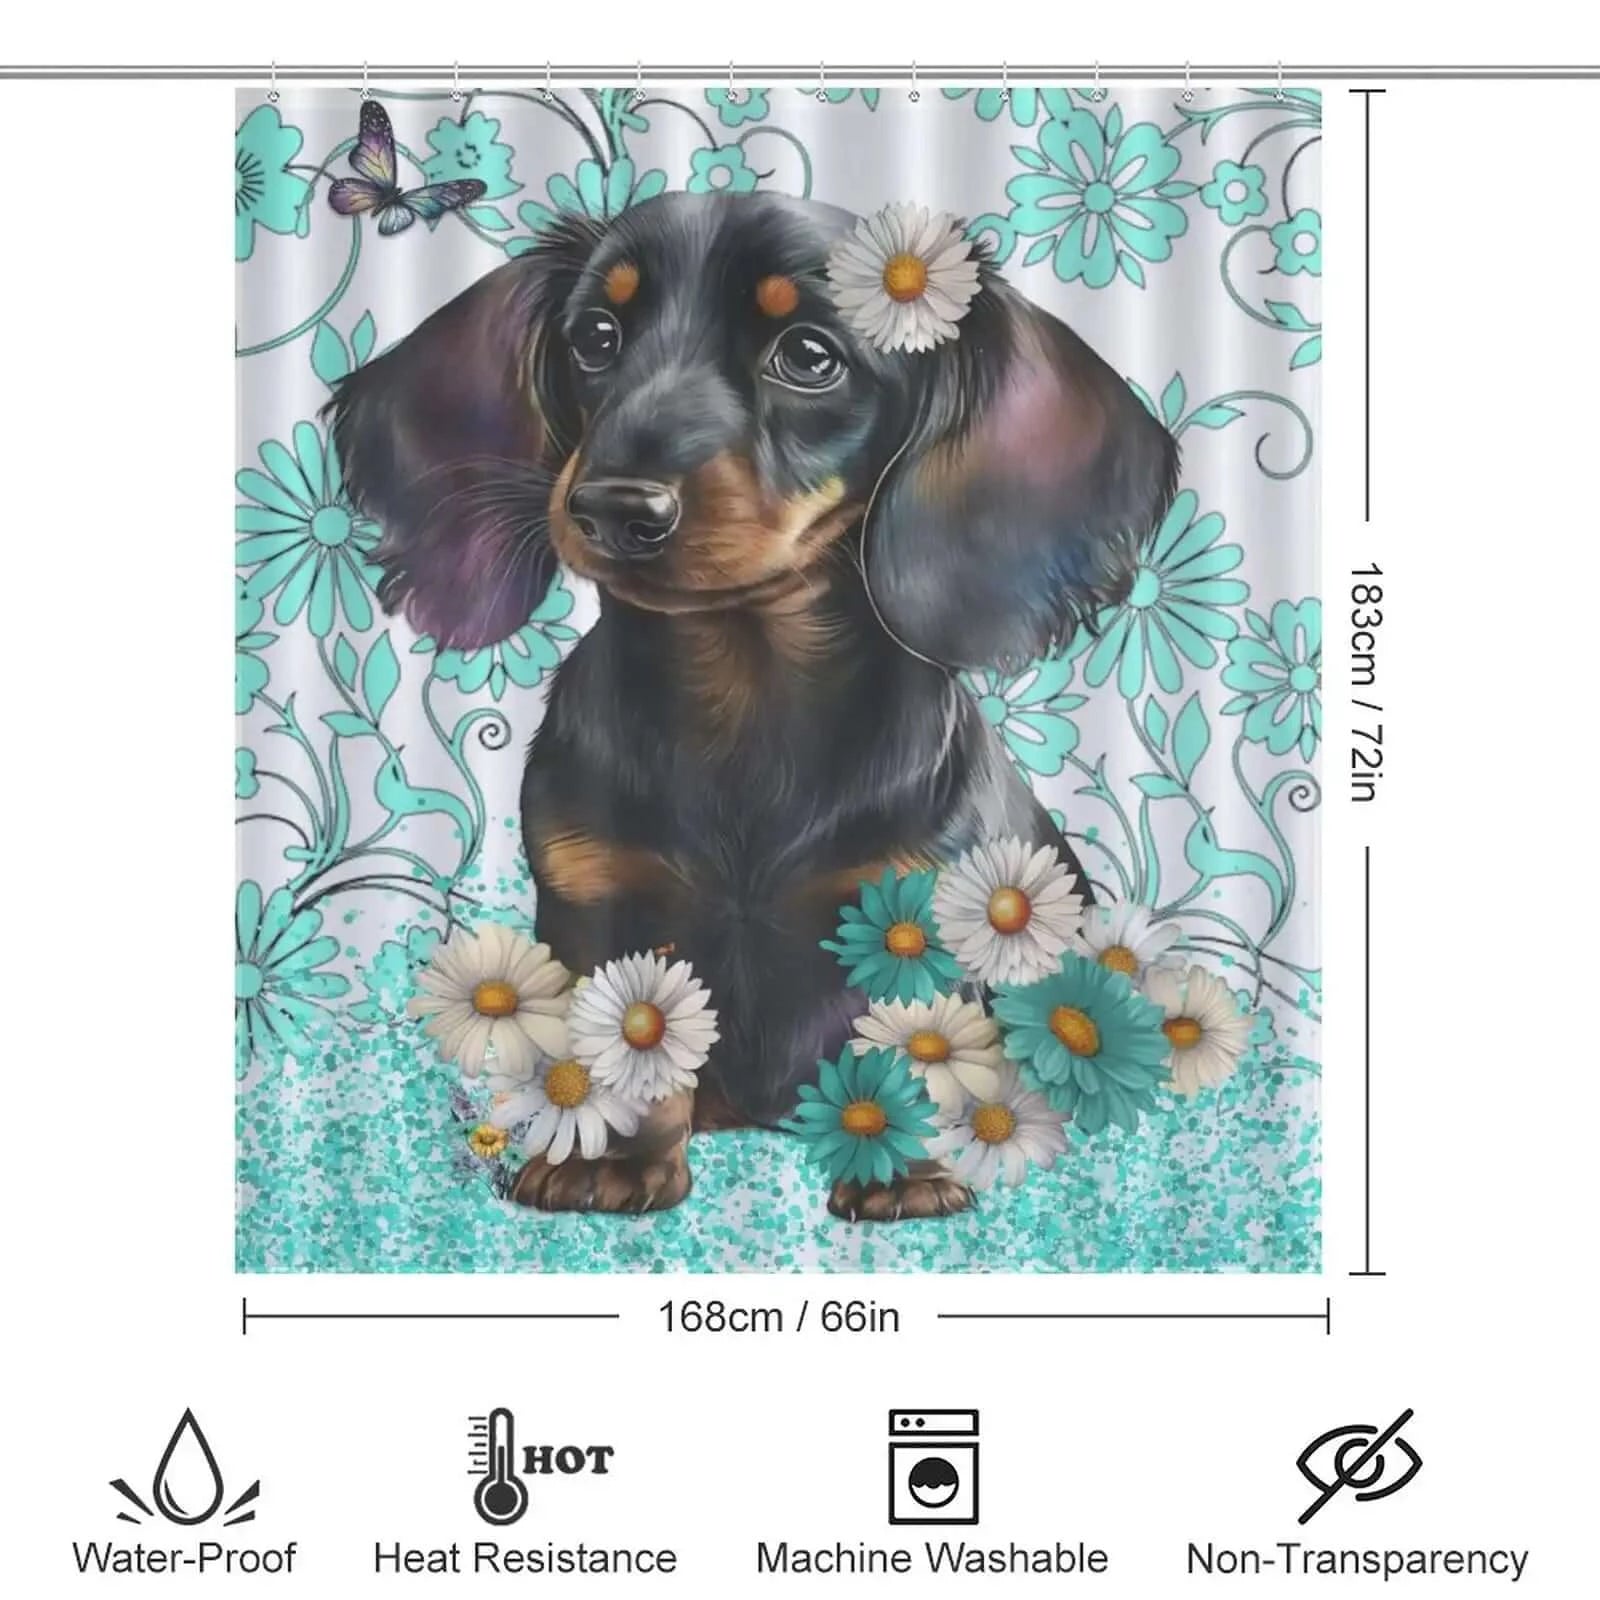 Cute Daschund Floral shower curtain adorned with daisies perfect for bathroom decor by Cotton Cat.